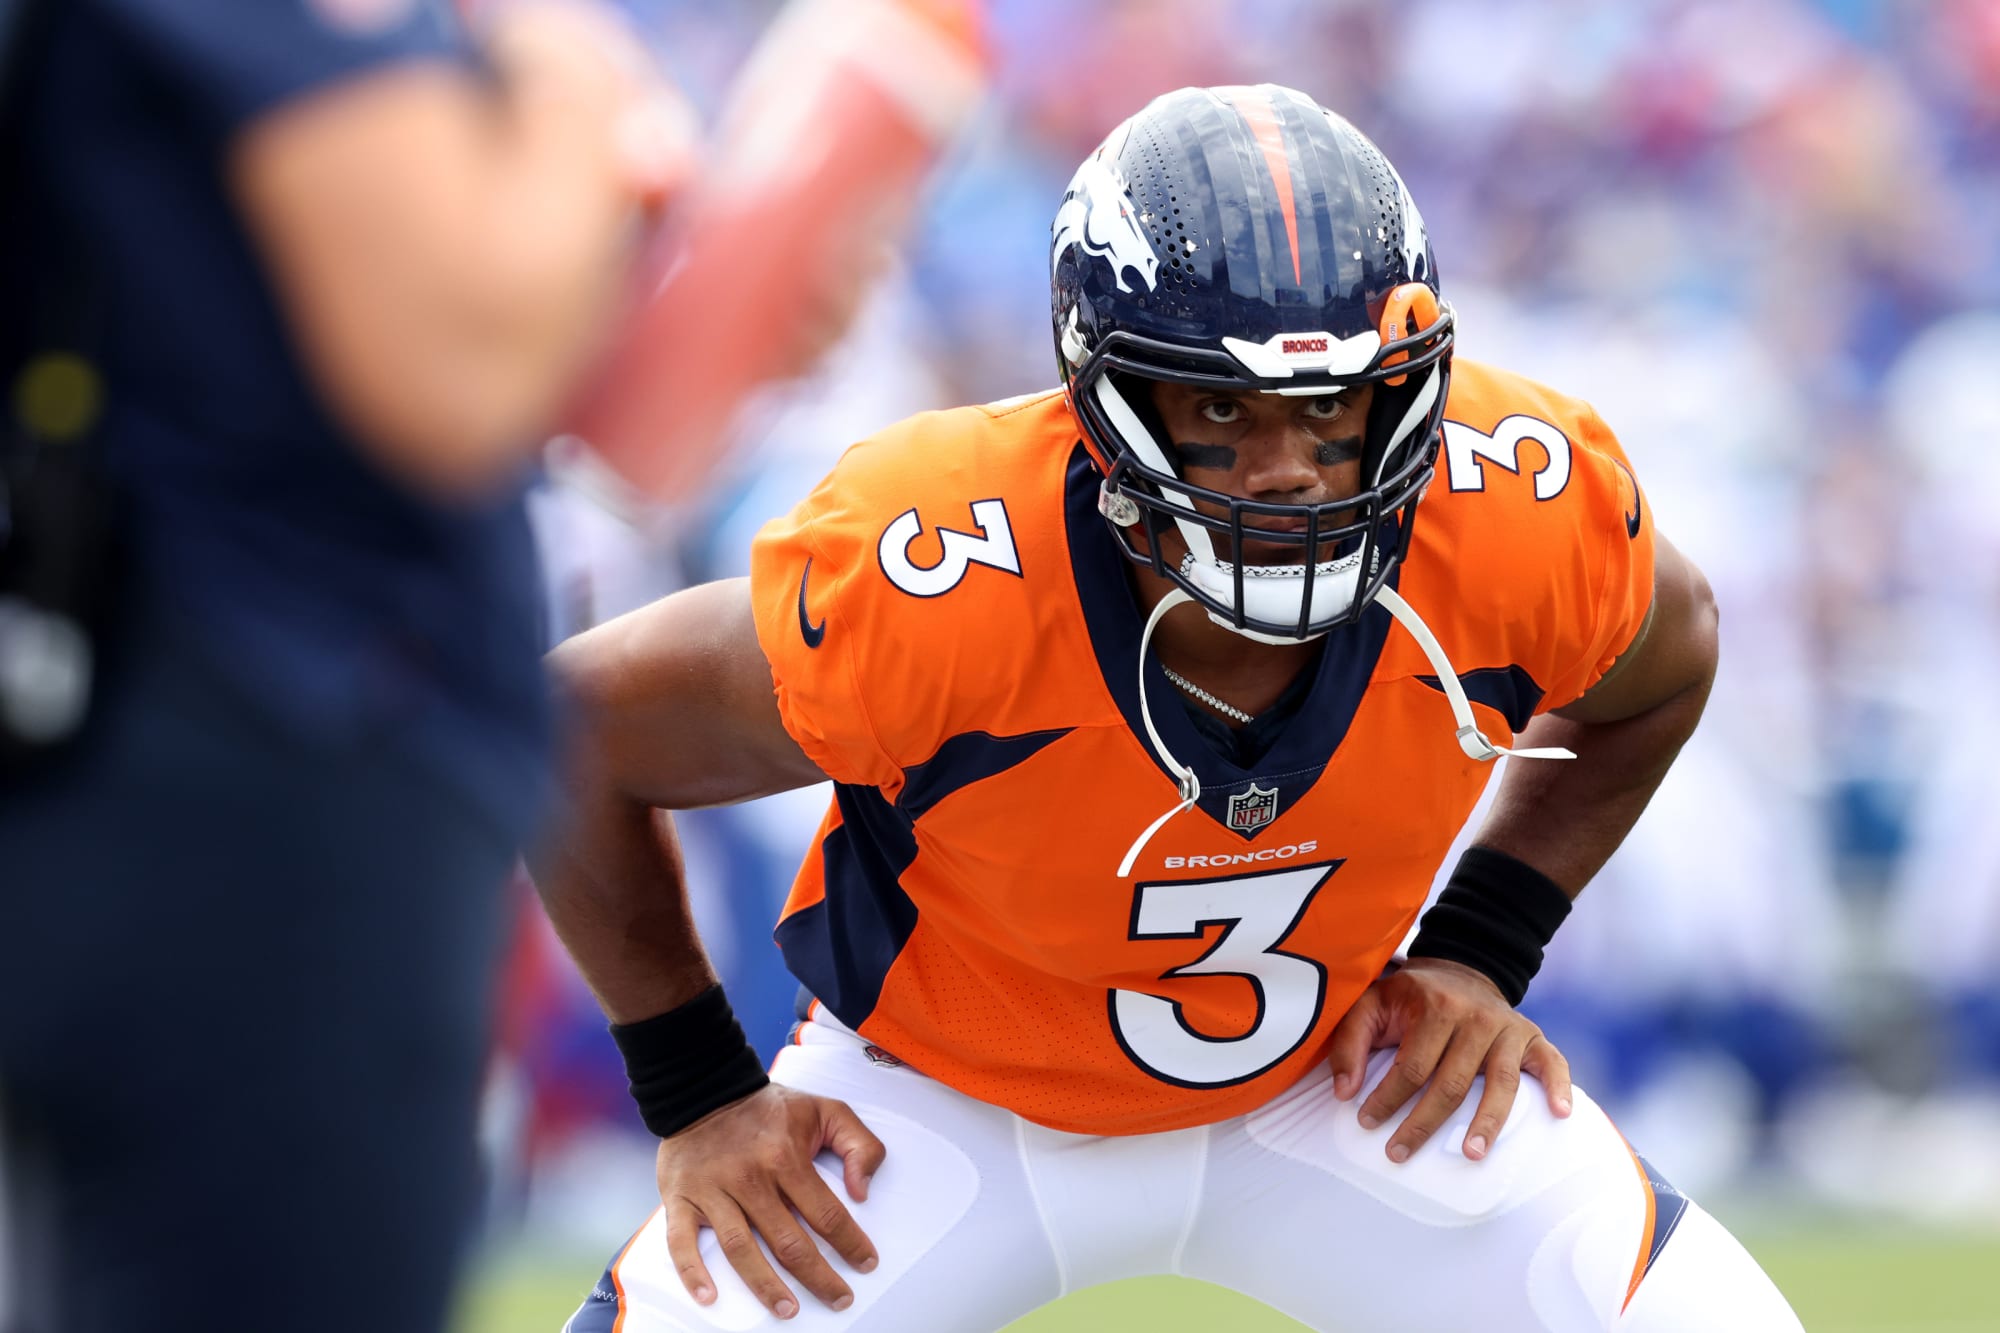 Russell Wilson rides into the sunset on massive Broncos extension